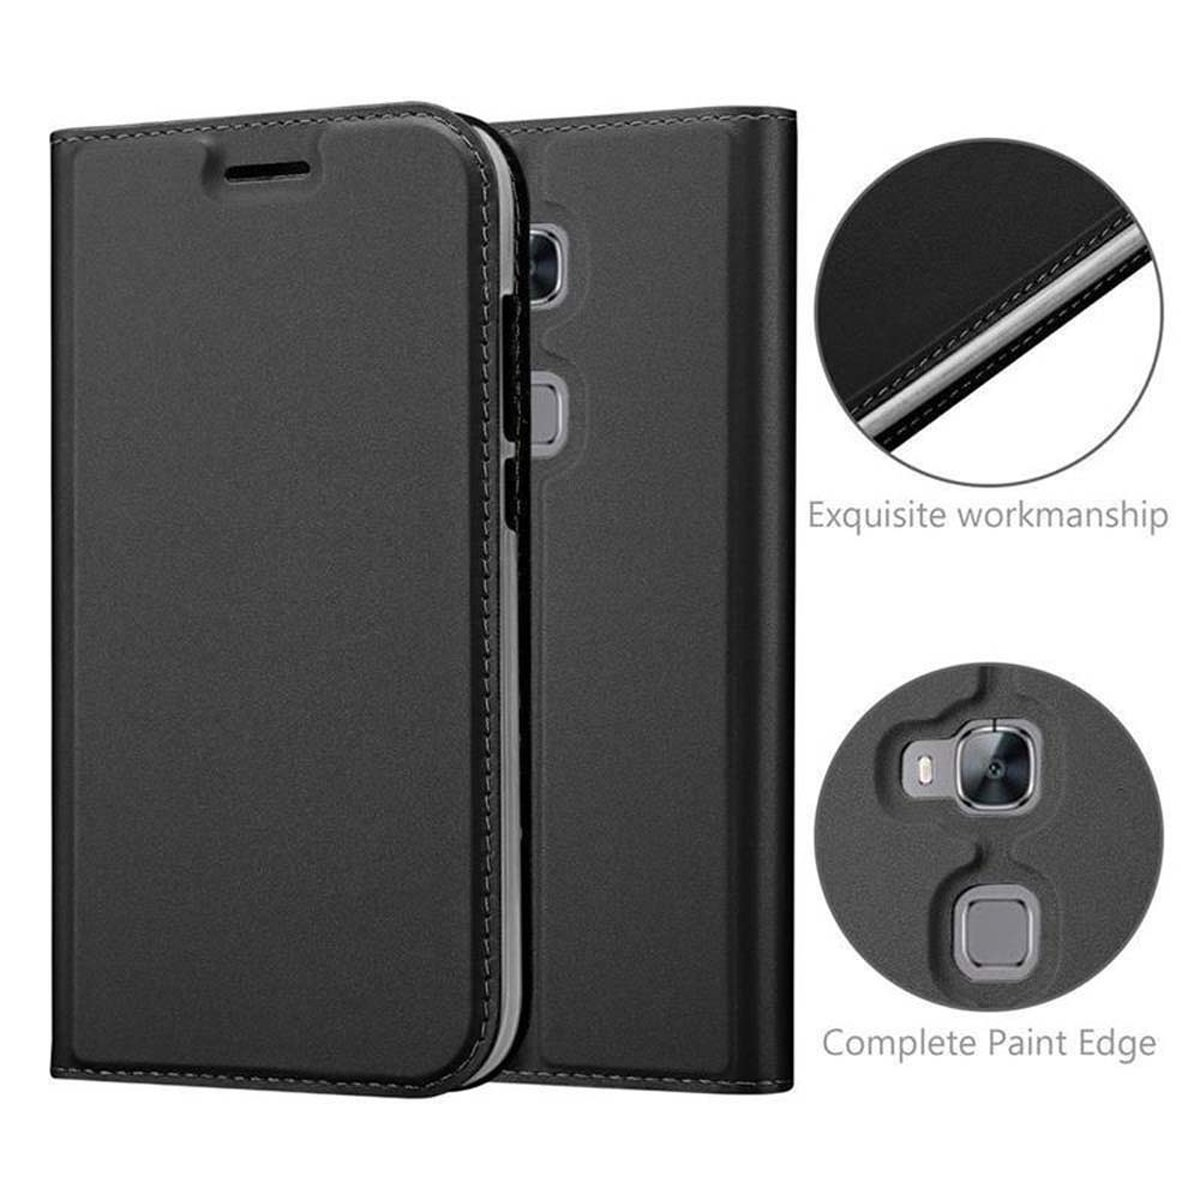 SCHWARZ PLUS Huawei, Book CLASSY Handyhülle / Style, Bookcover, G8 ASCEND CADORABO G7 Classy / GX8,